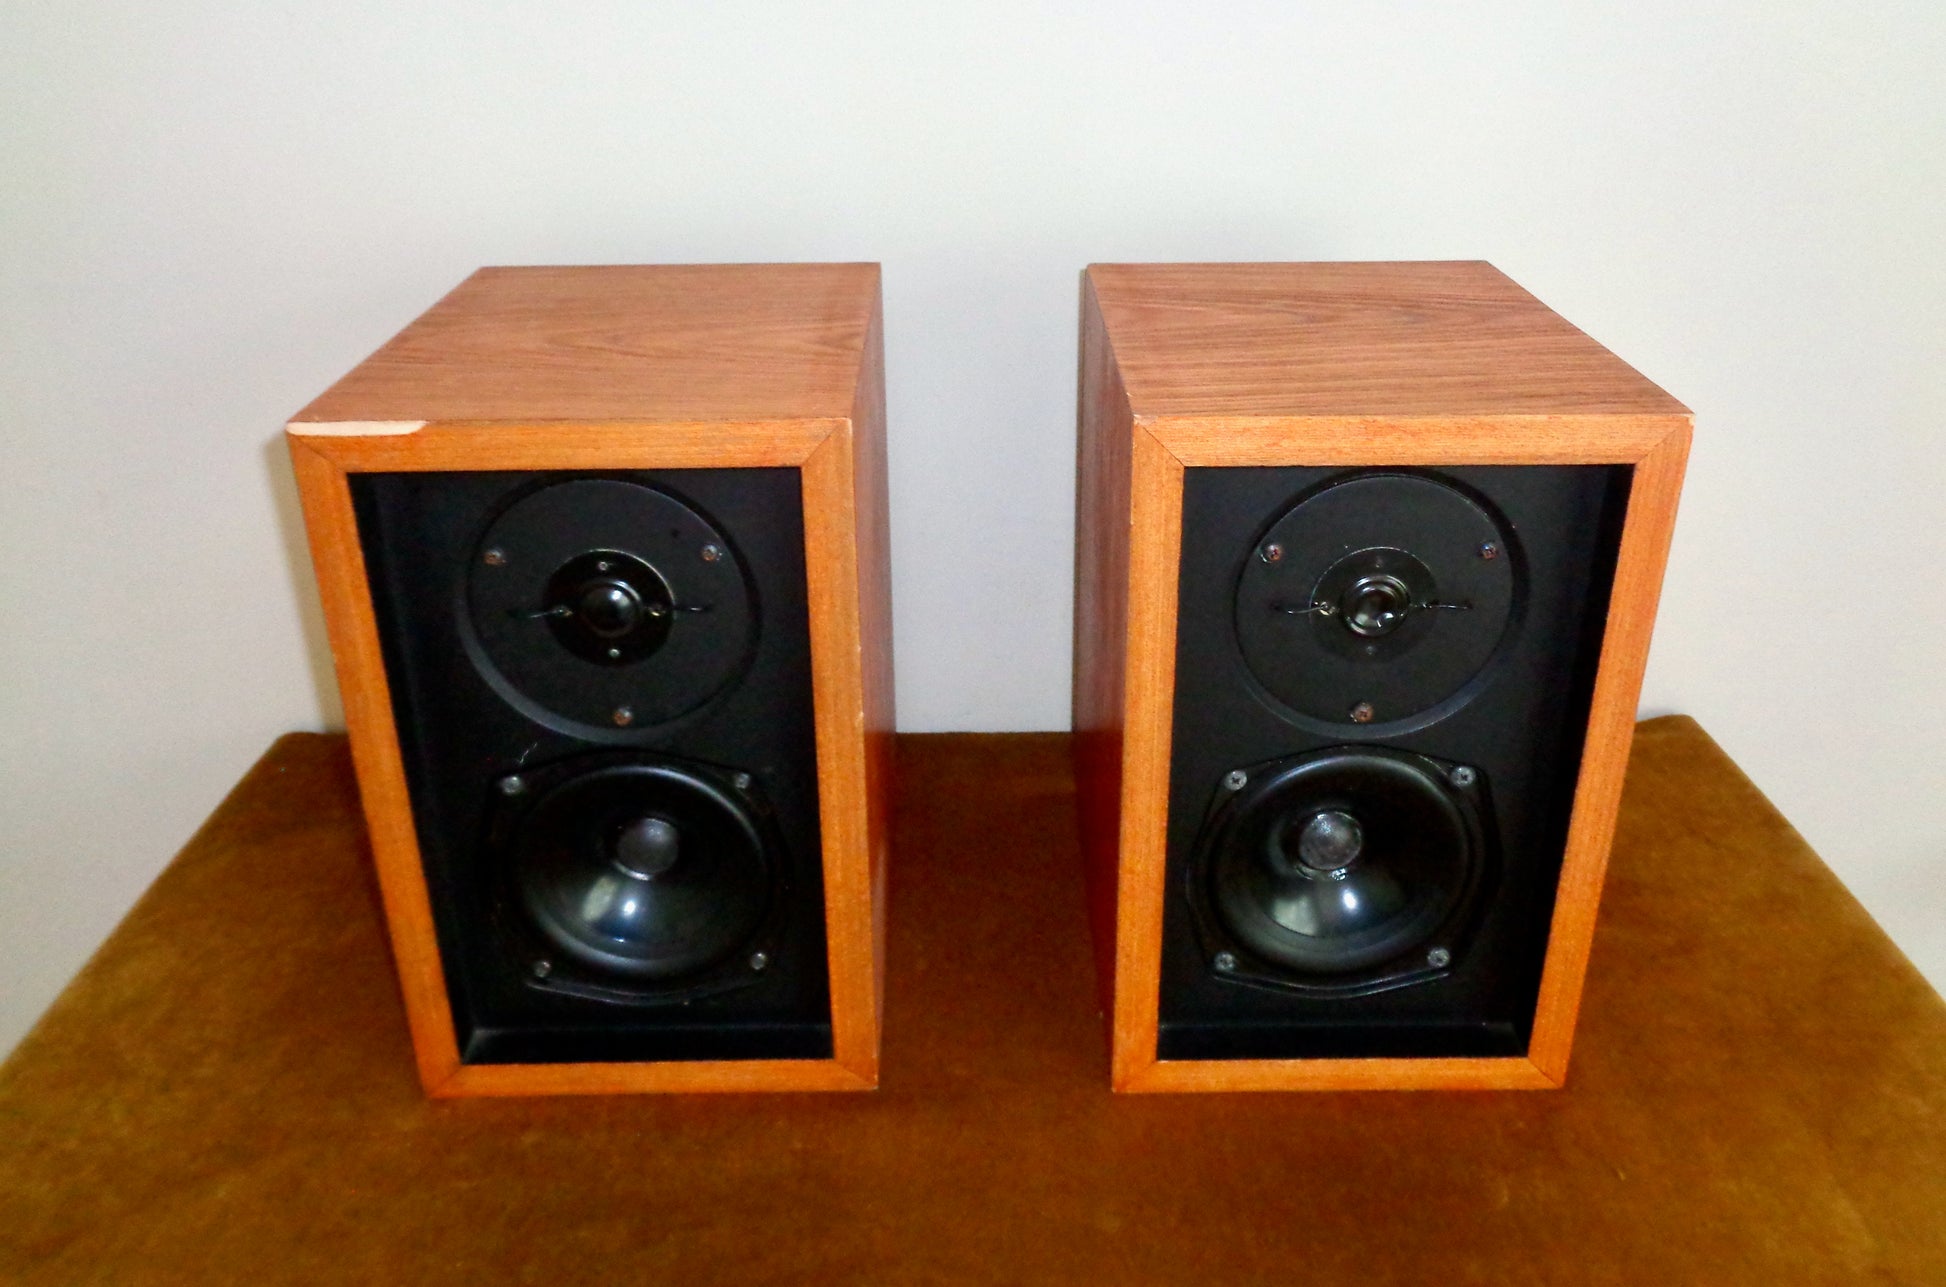 1970s LS3/5A Clone HiFi Speakers With KEF Drive Units